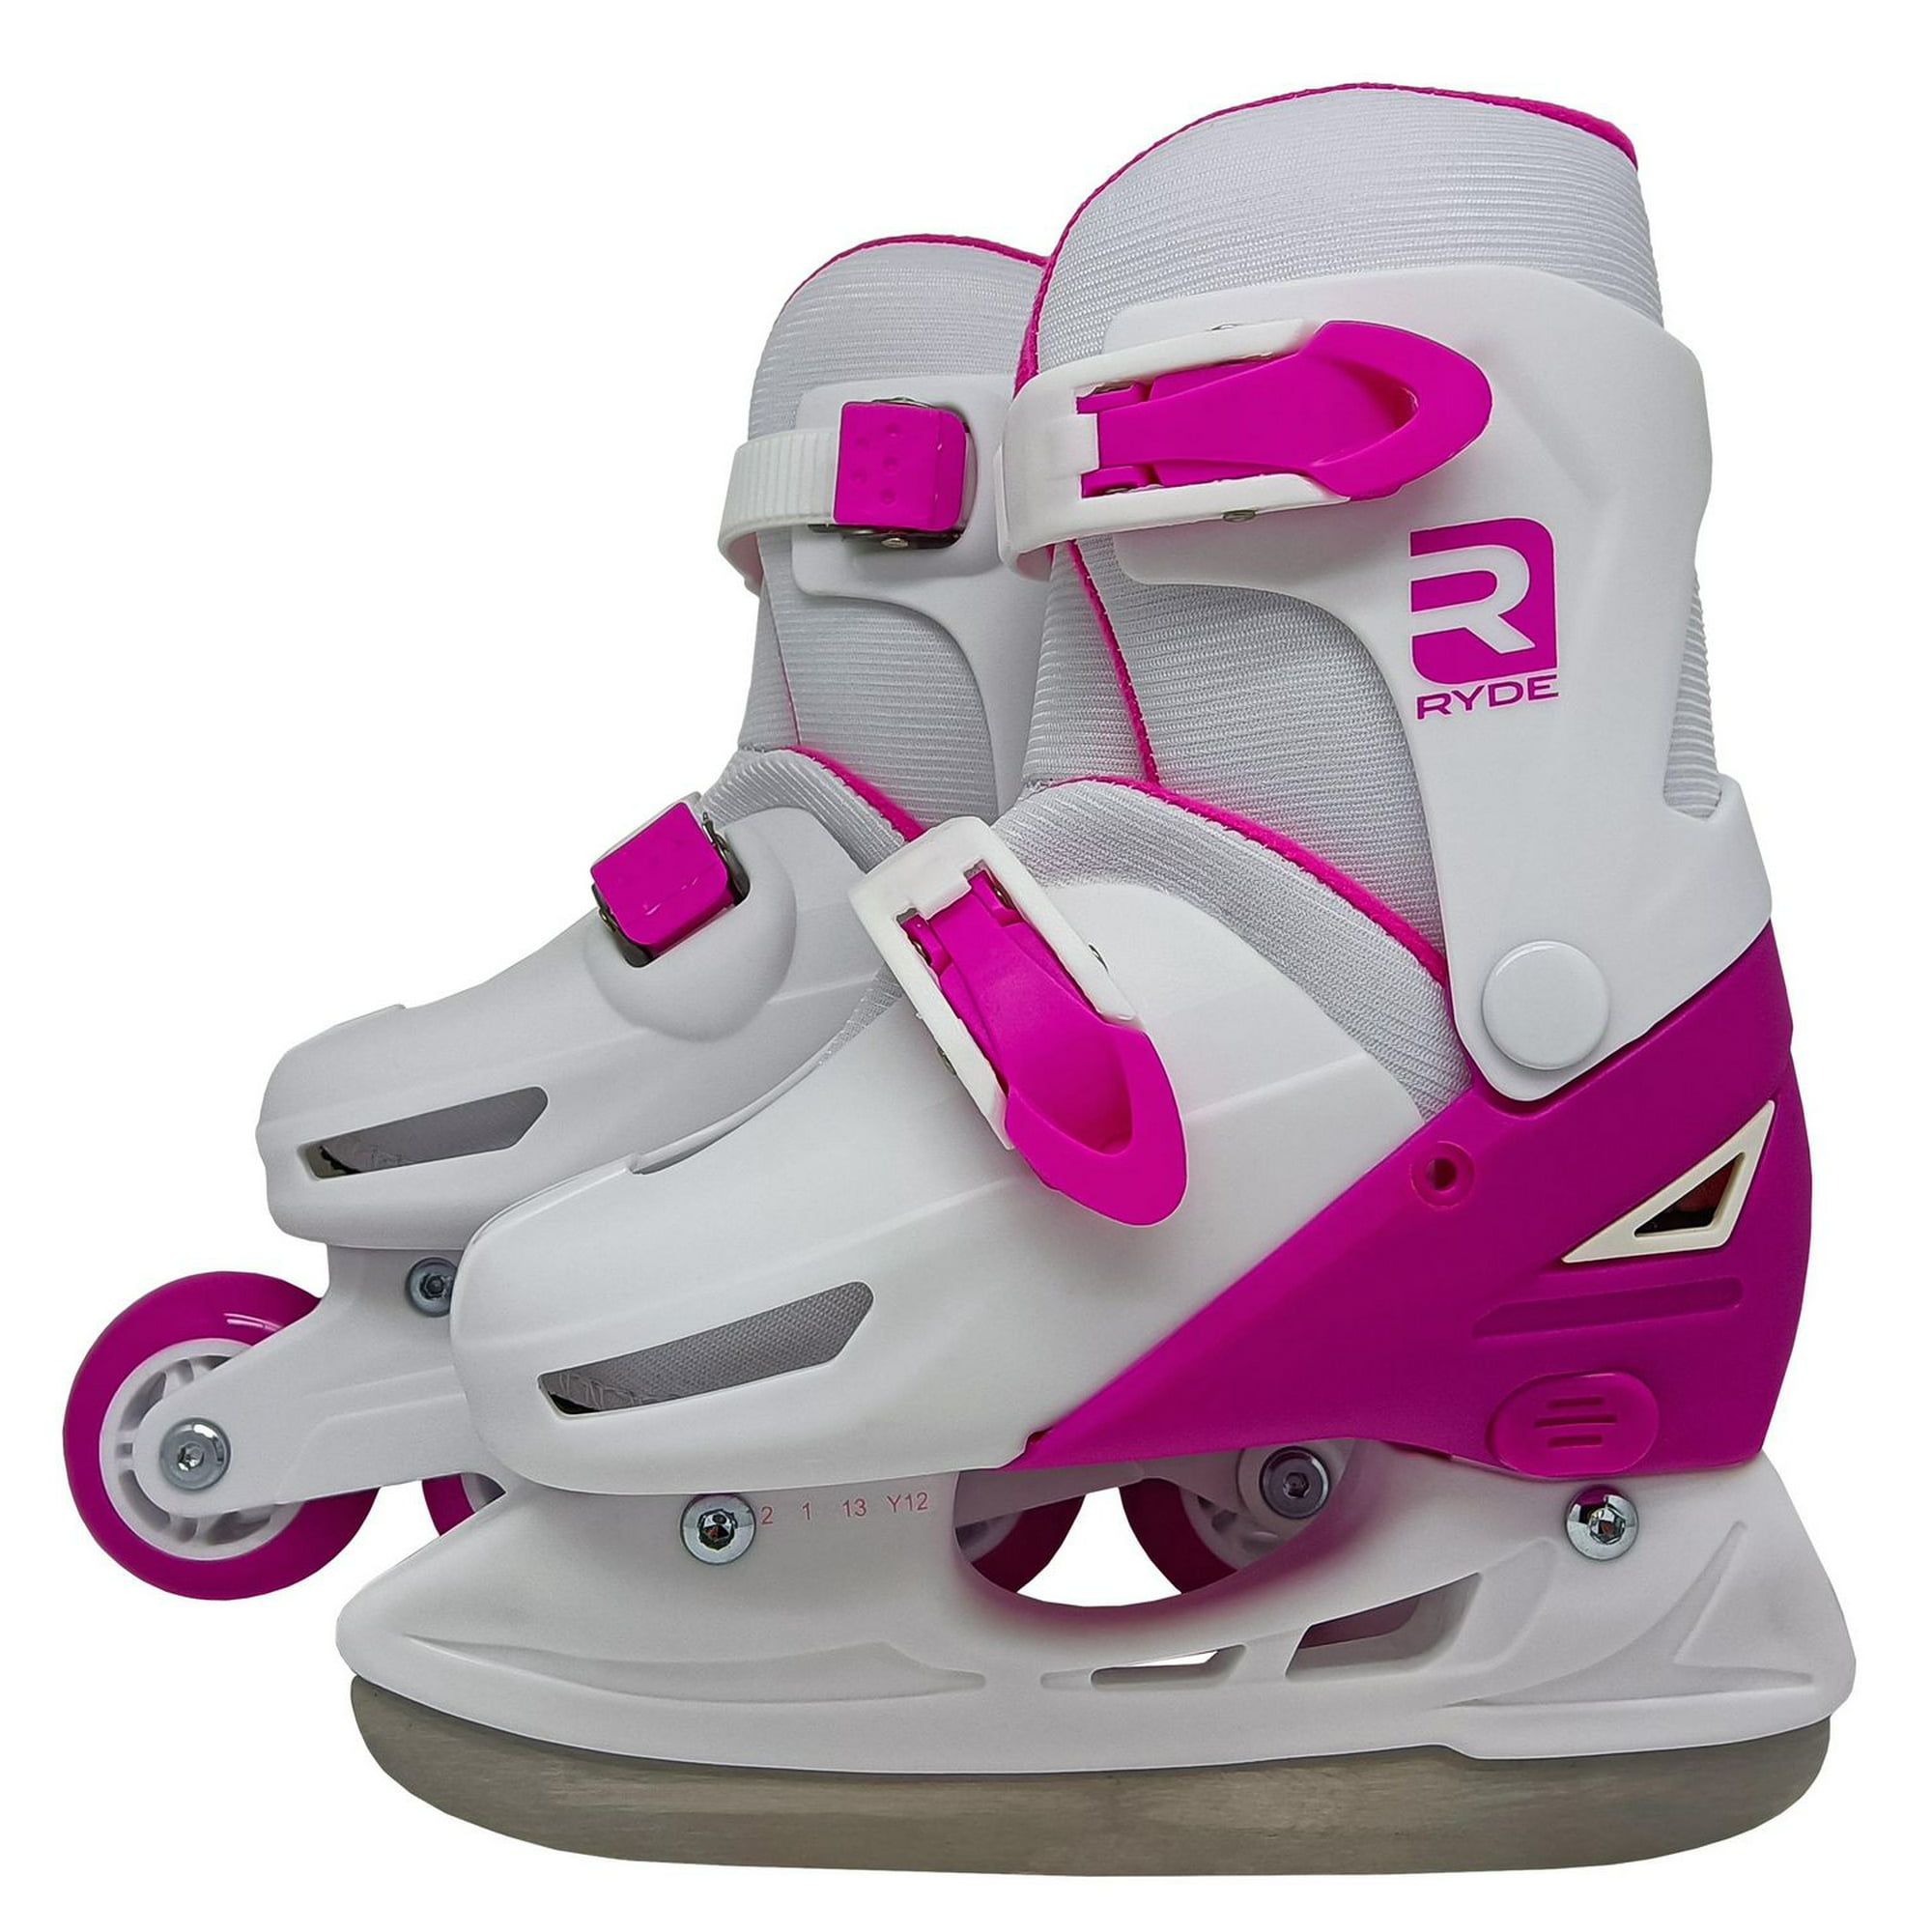 ice skating gifts, ice skating gifts Suppliers and Manufacturers at